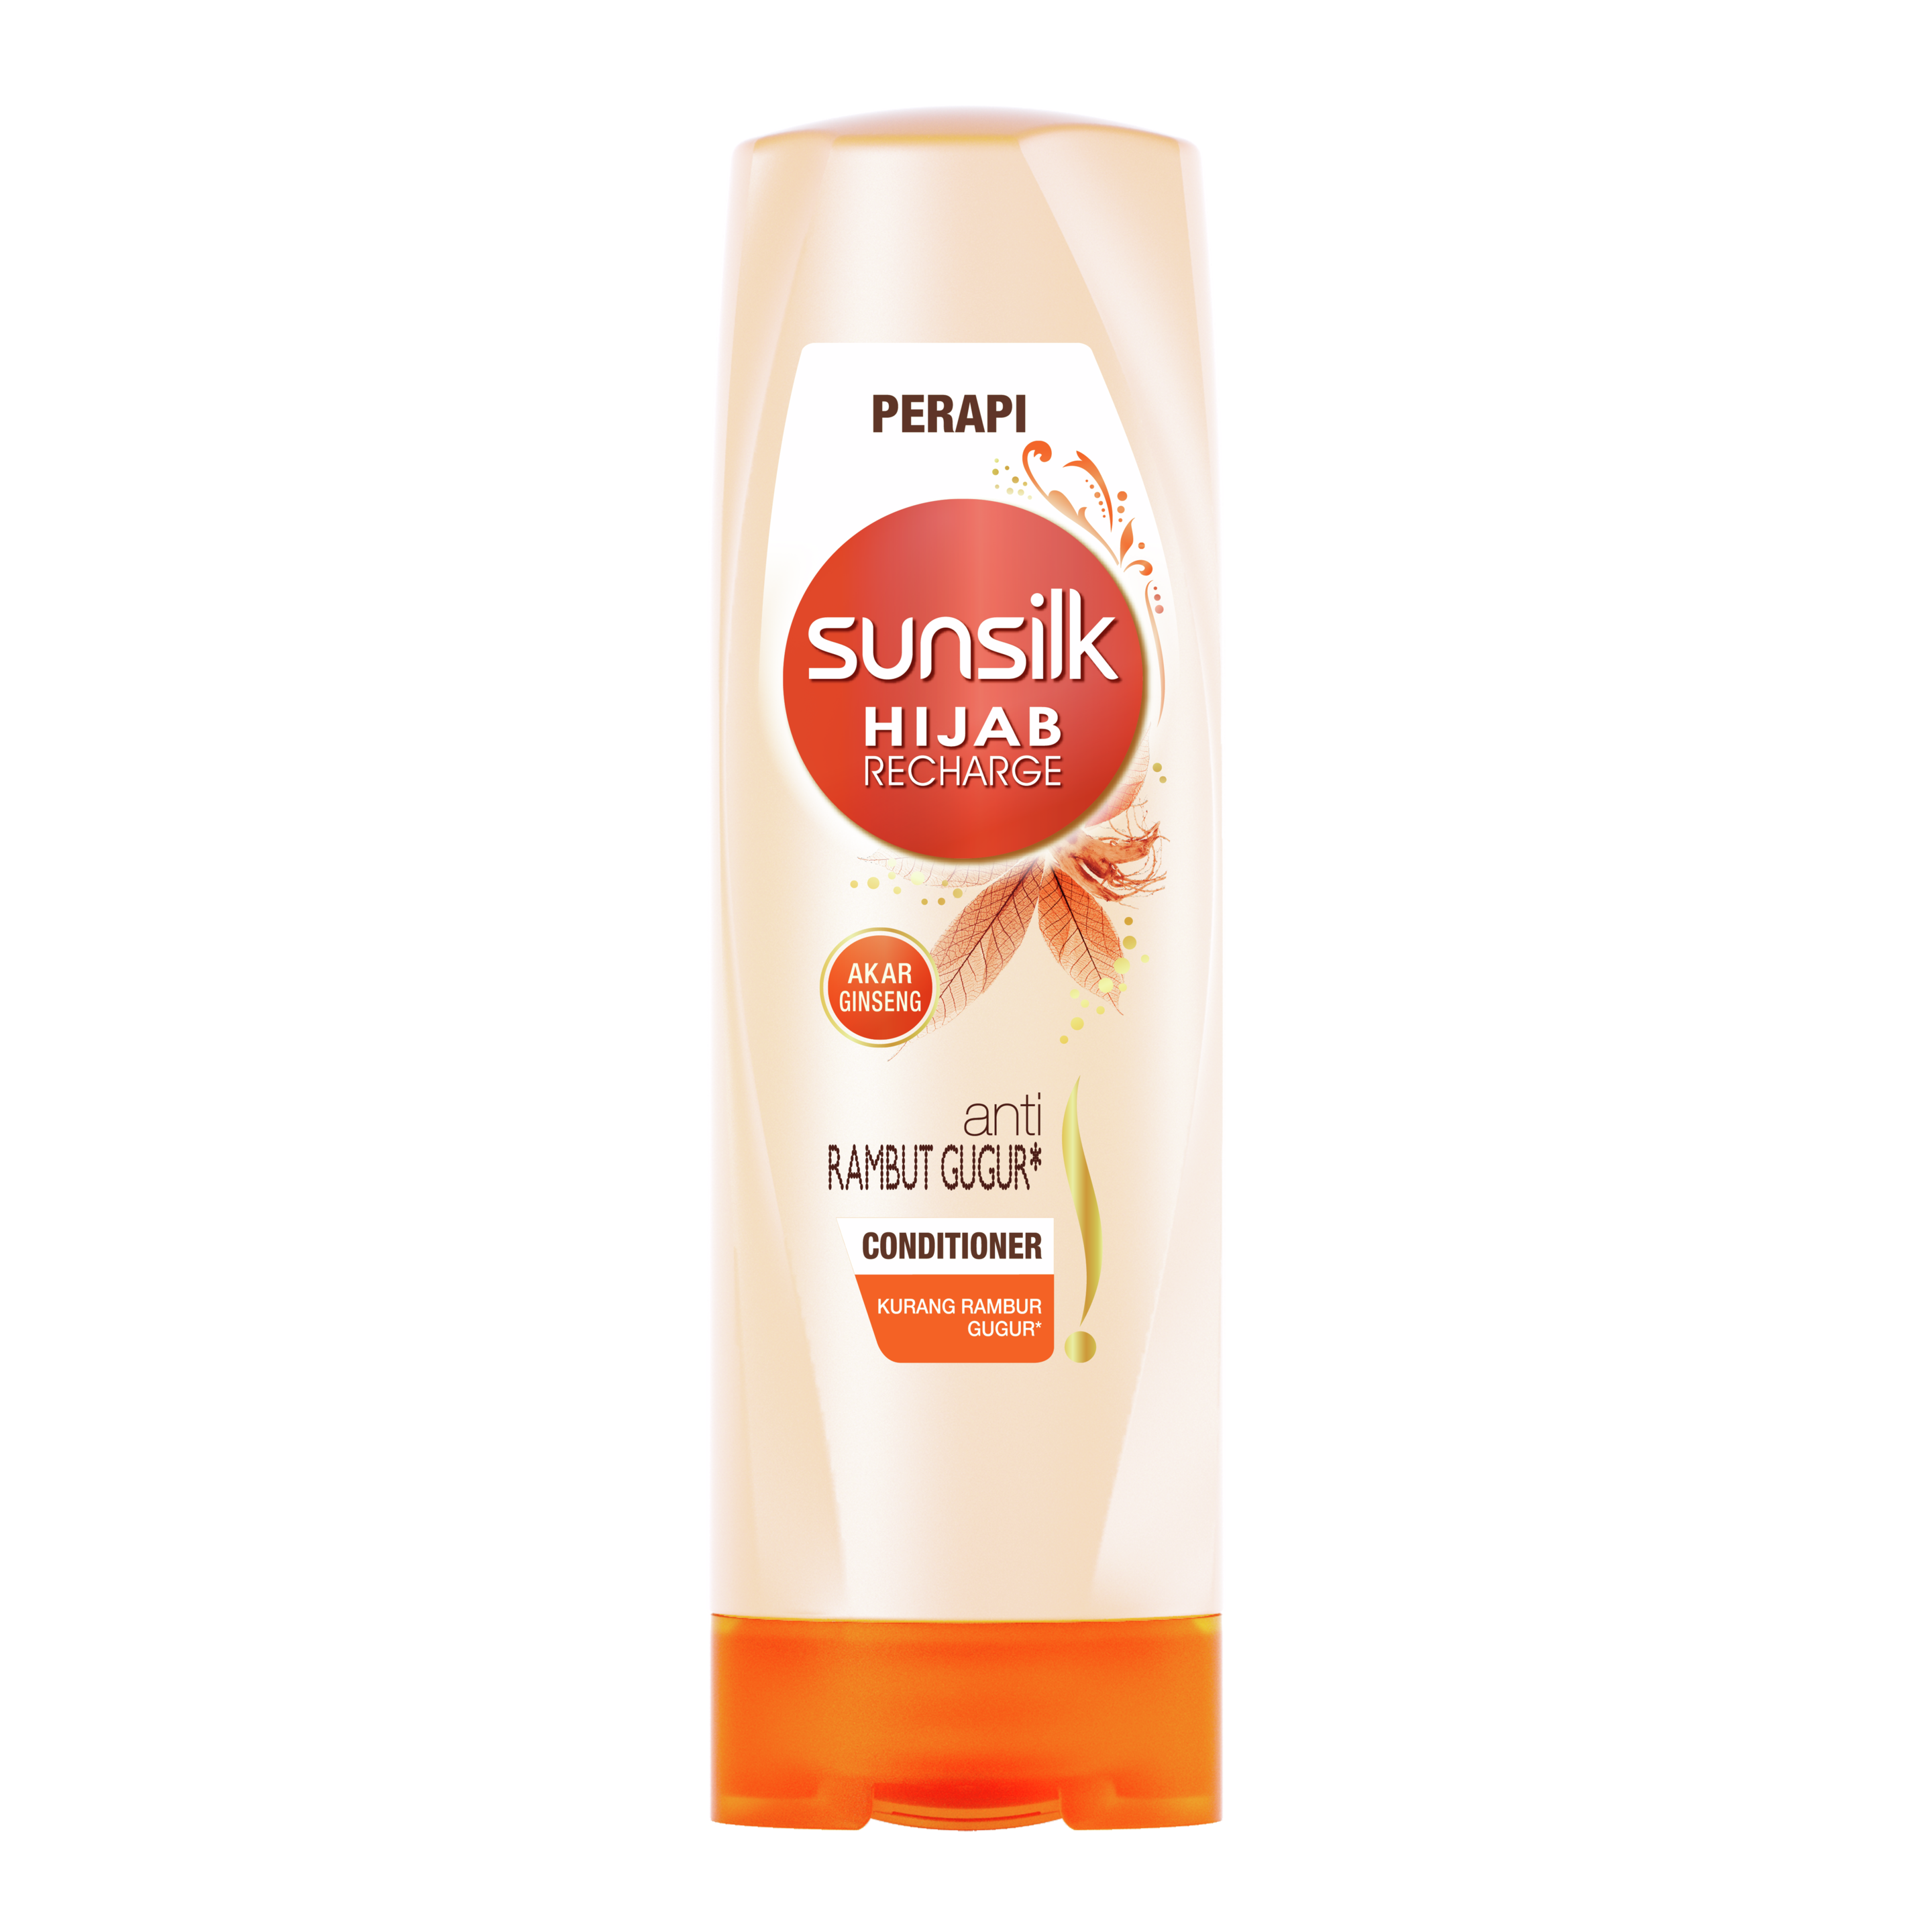 Sunsilk Hijab Recharge Anti Rambut Gugur Conditioner 160ml front of pack image